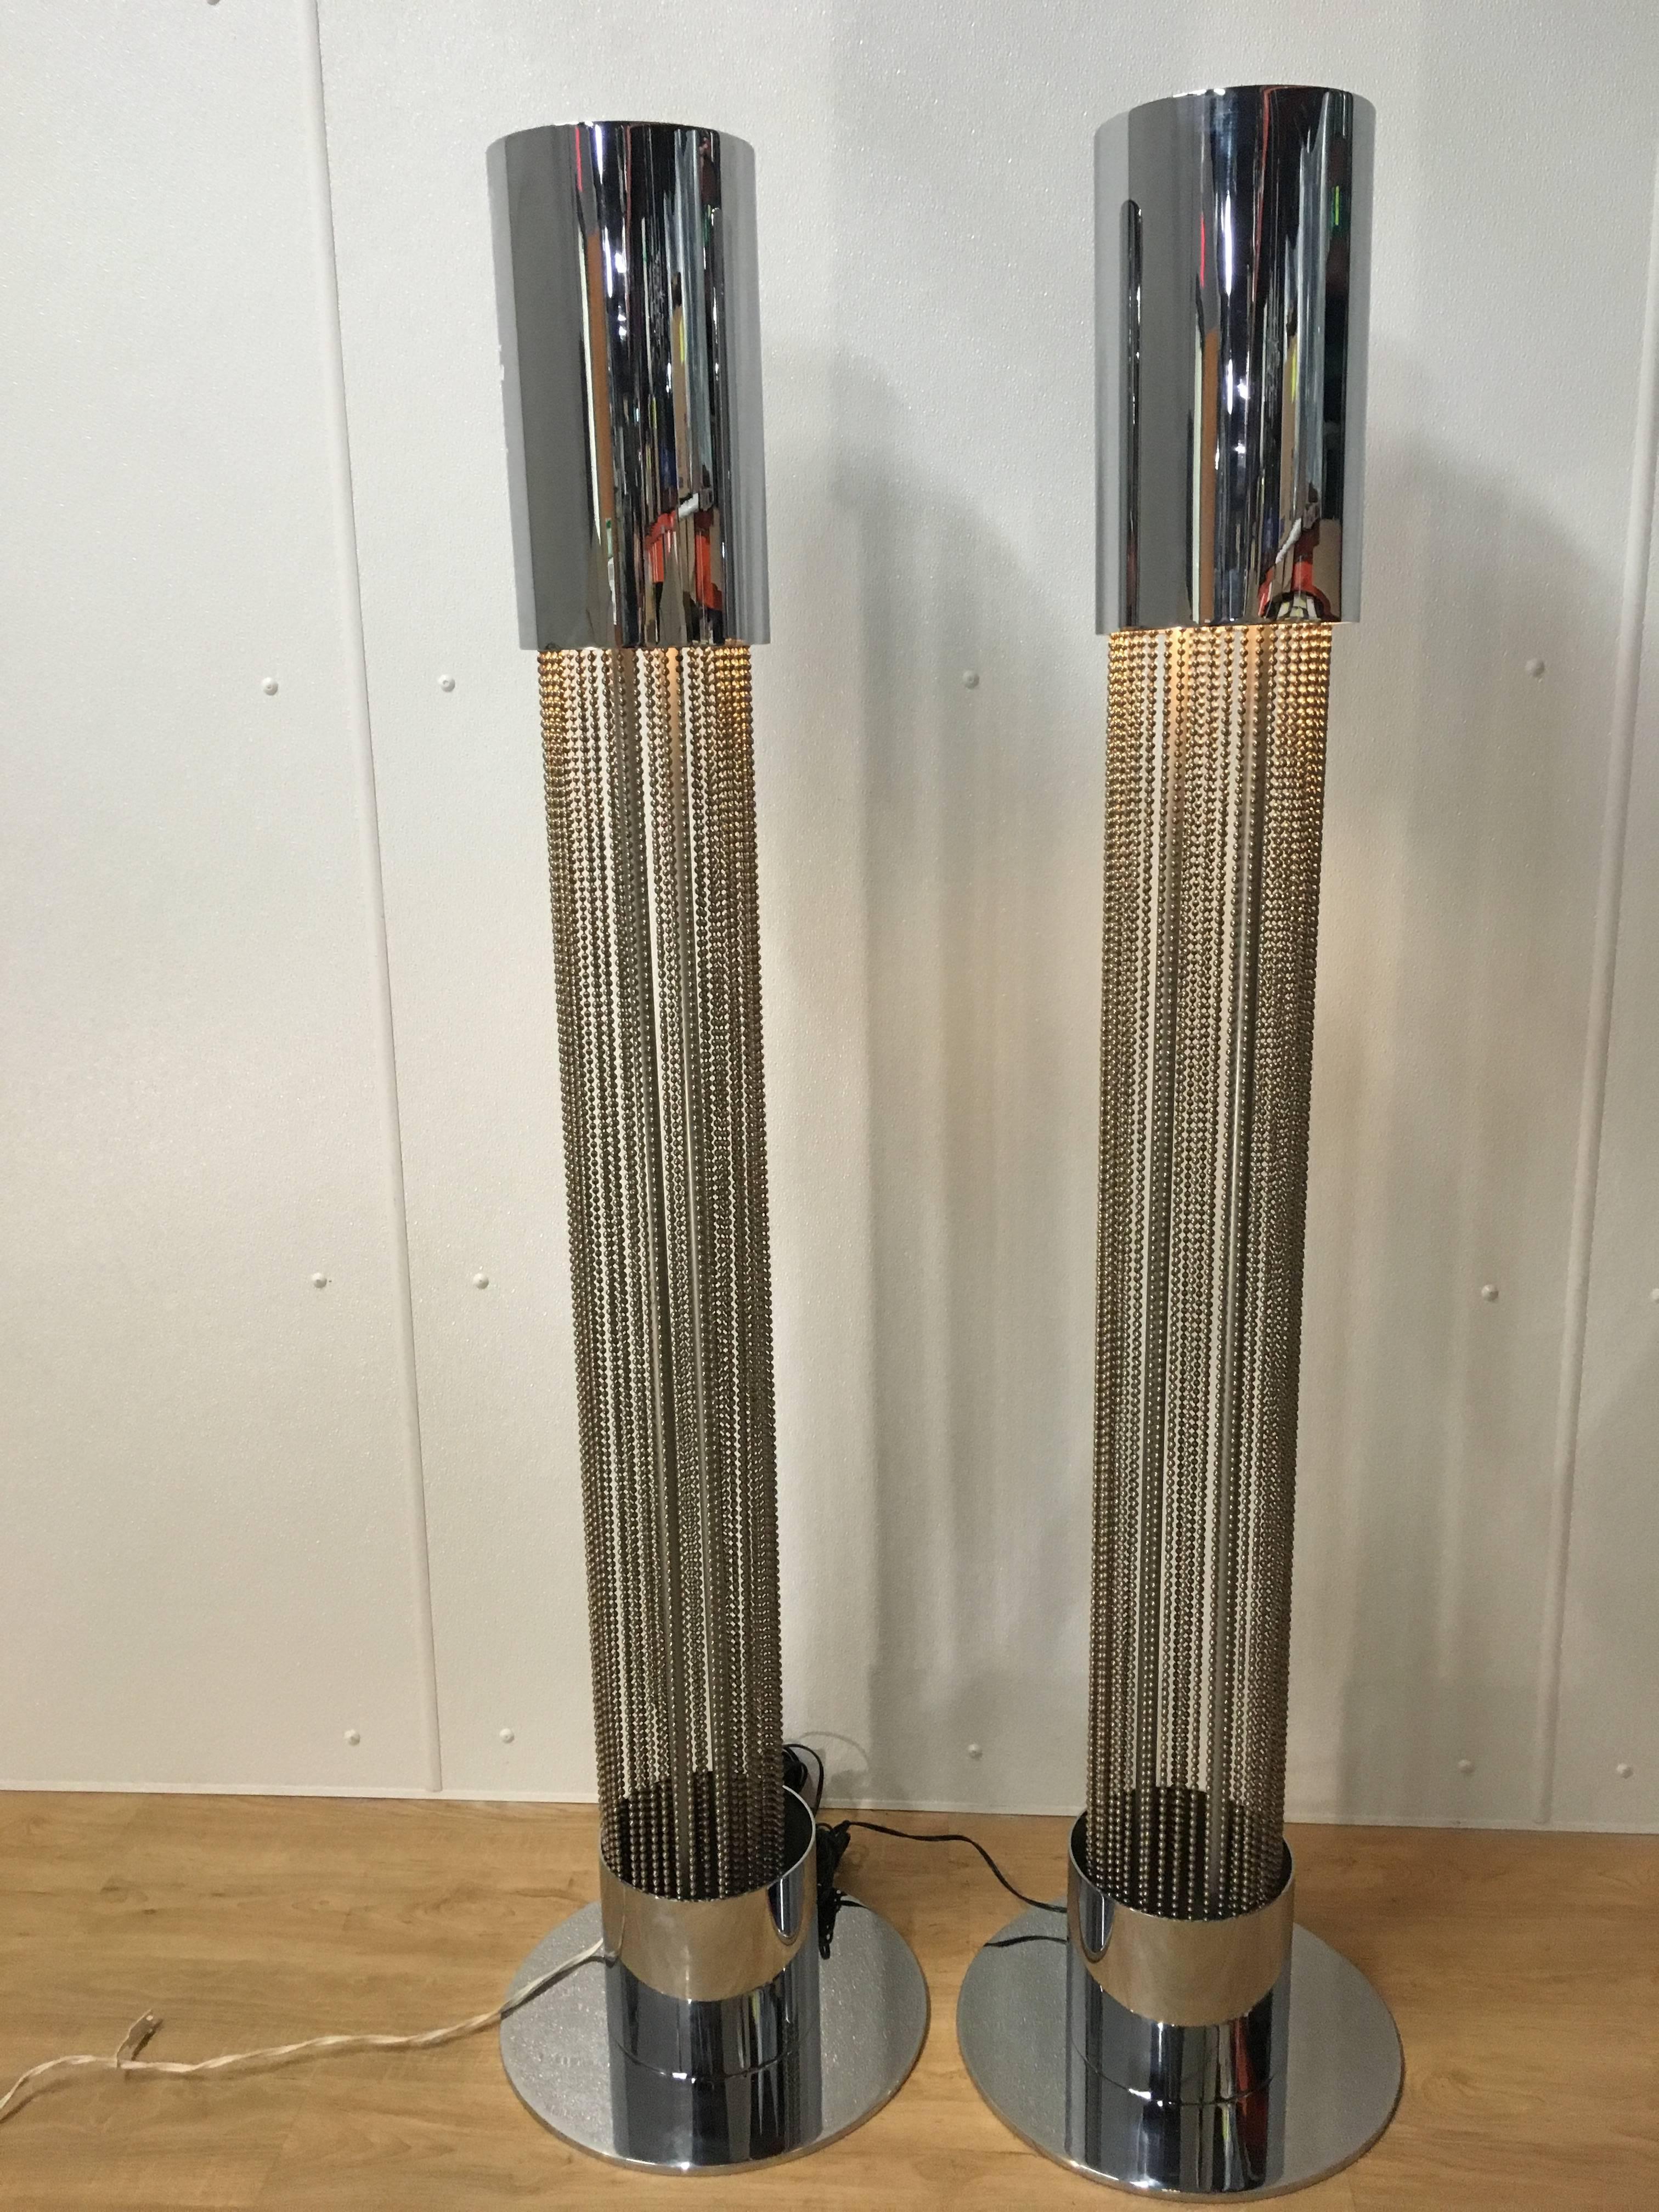 Pair of chrome floor lamps by Pierre Cardin. Each one of circular pedestal form with hanging acid washed steel ball chain, resting in conforming platform base. Chrome is in triple mint condition, wiring is new.